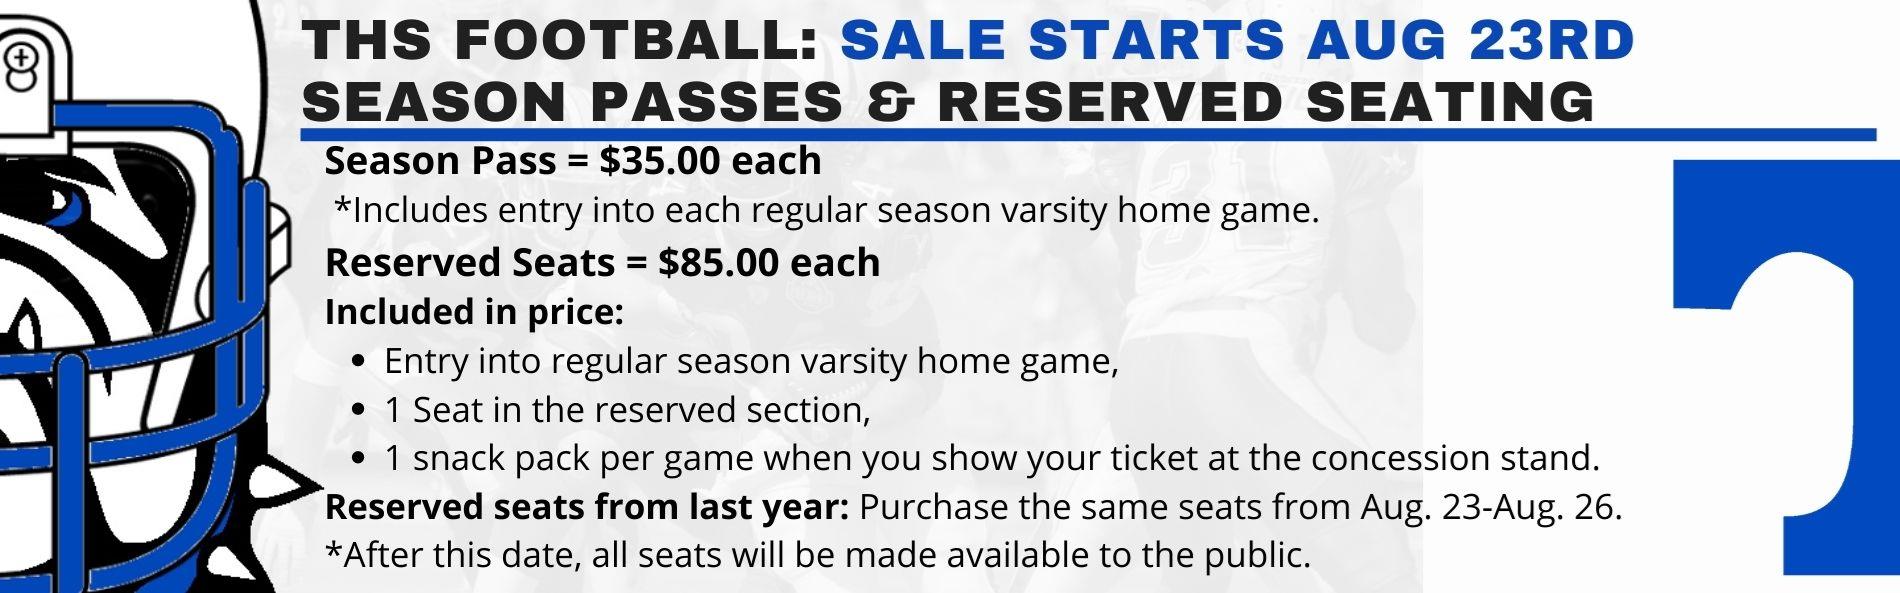 RESERVED SEATS INFORMATION